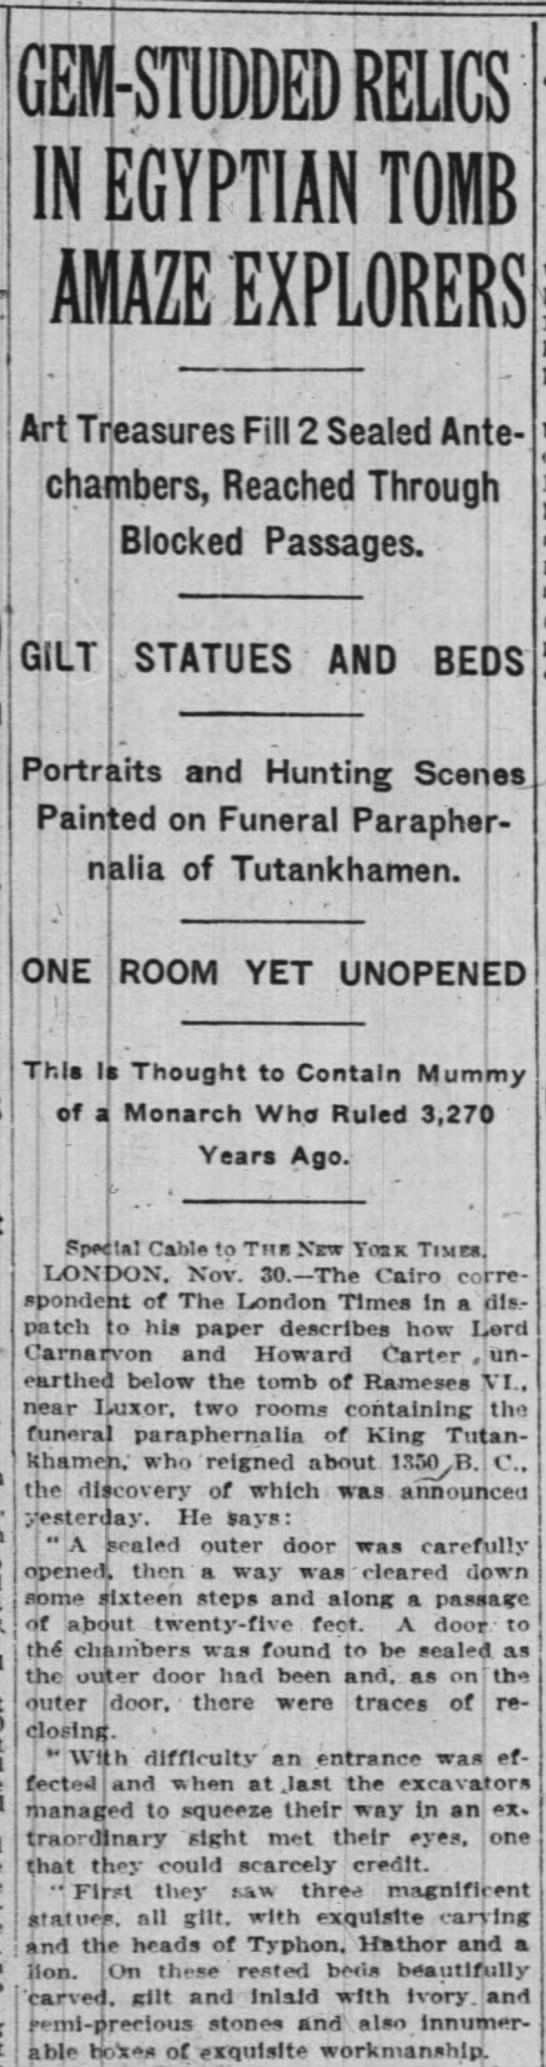 Today in 1922 : News of the discovery of the treasures of Old King Tut breaks out all over the world - 